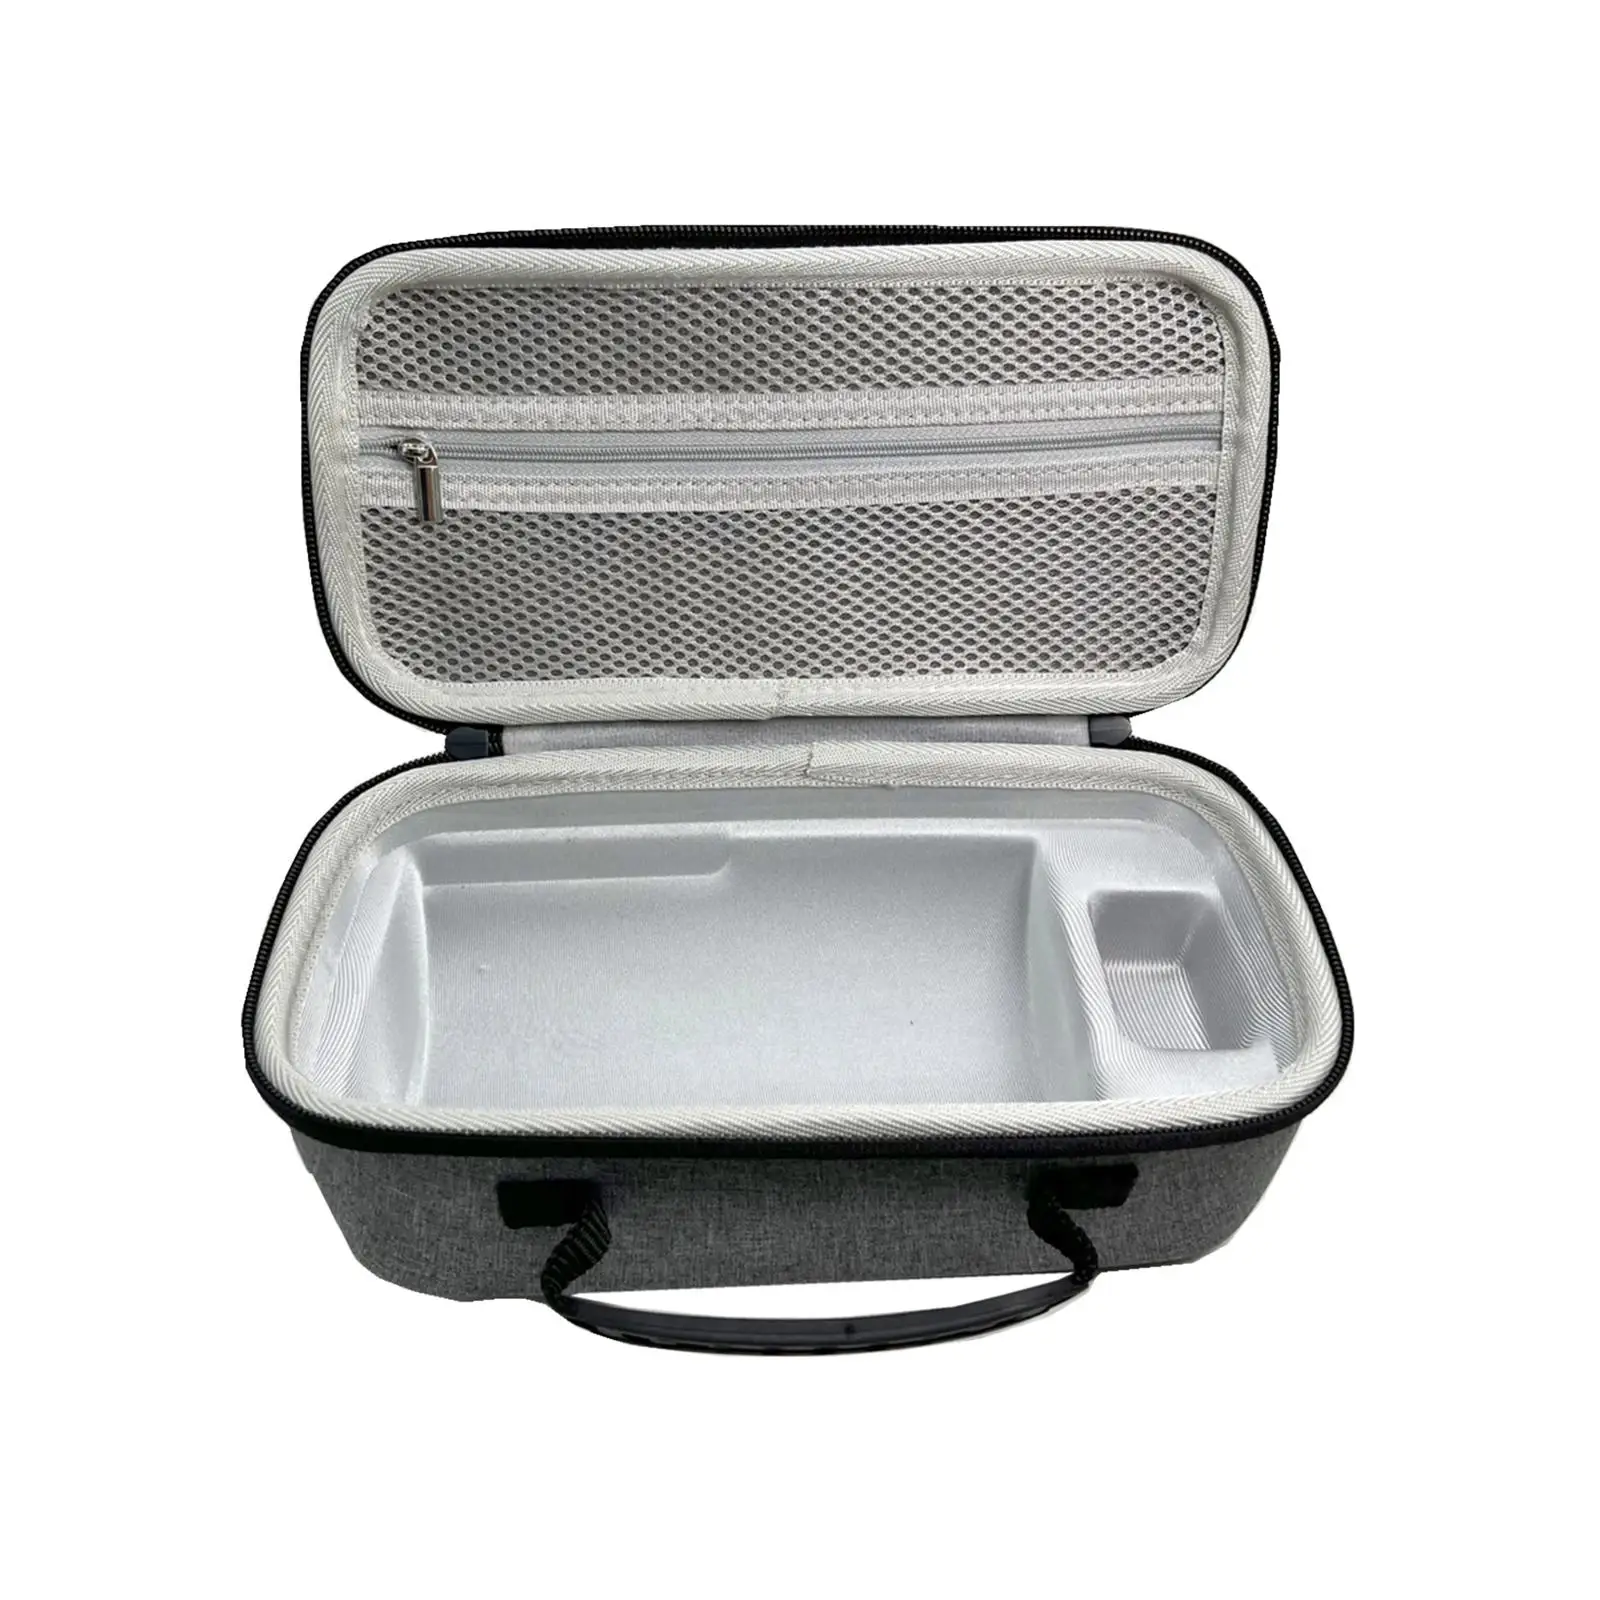 Projector Carry Case Handbag with Handle Projector Travel Case for capsule Projector 240mmx115mmx125mm Protective